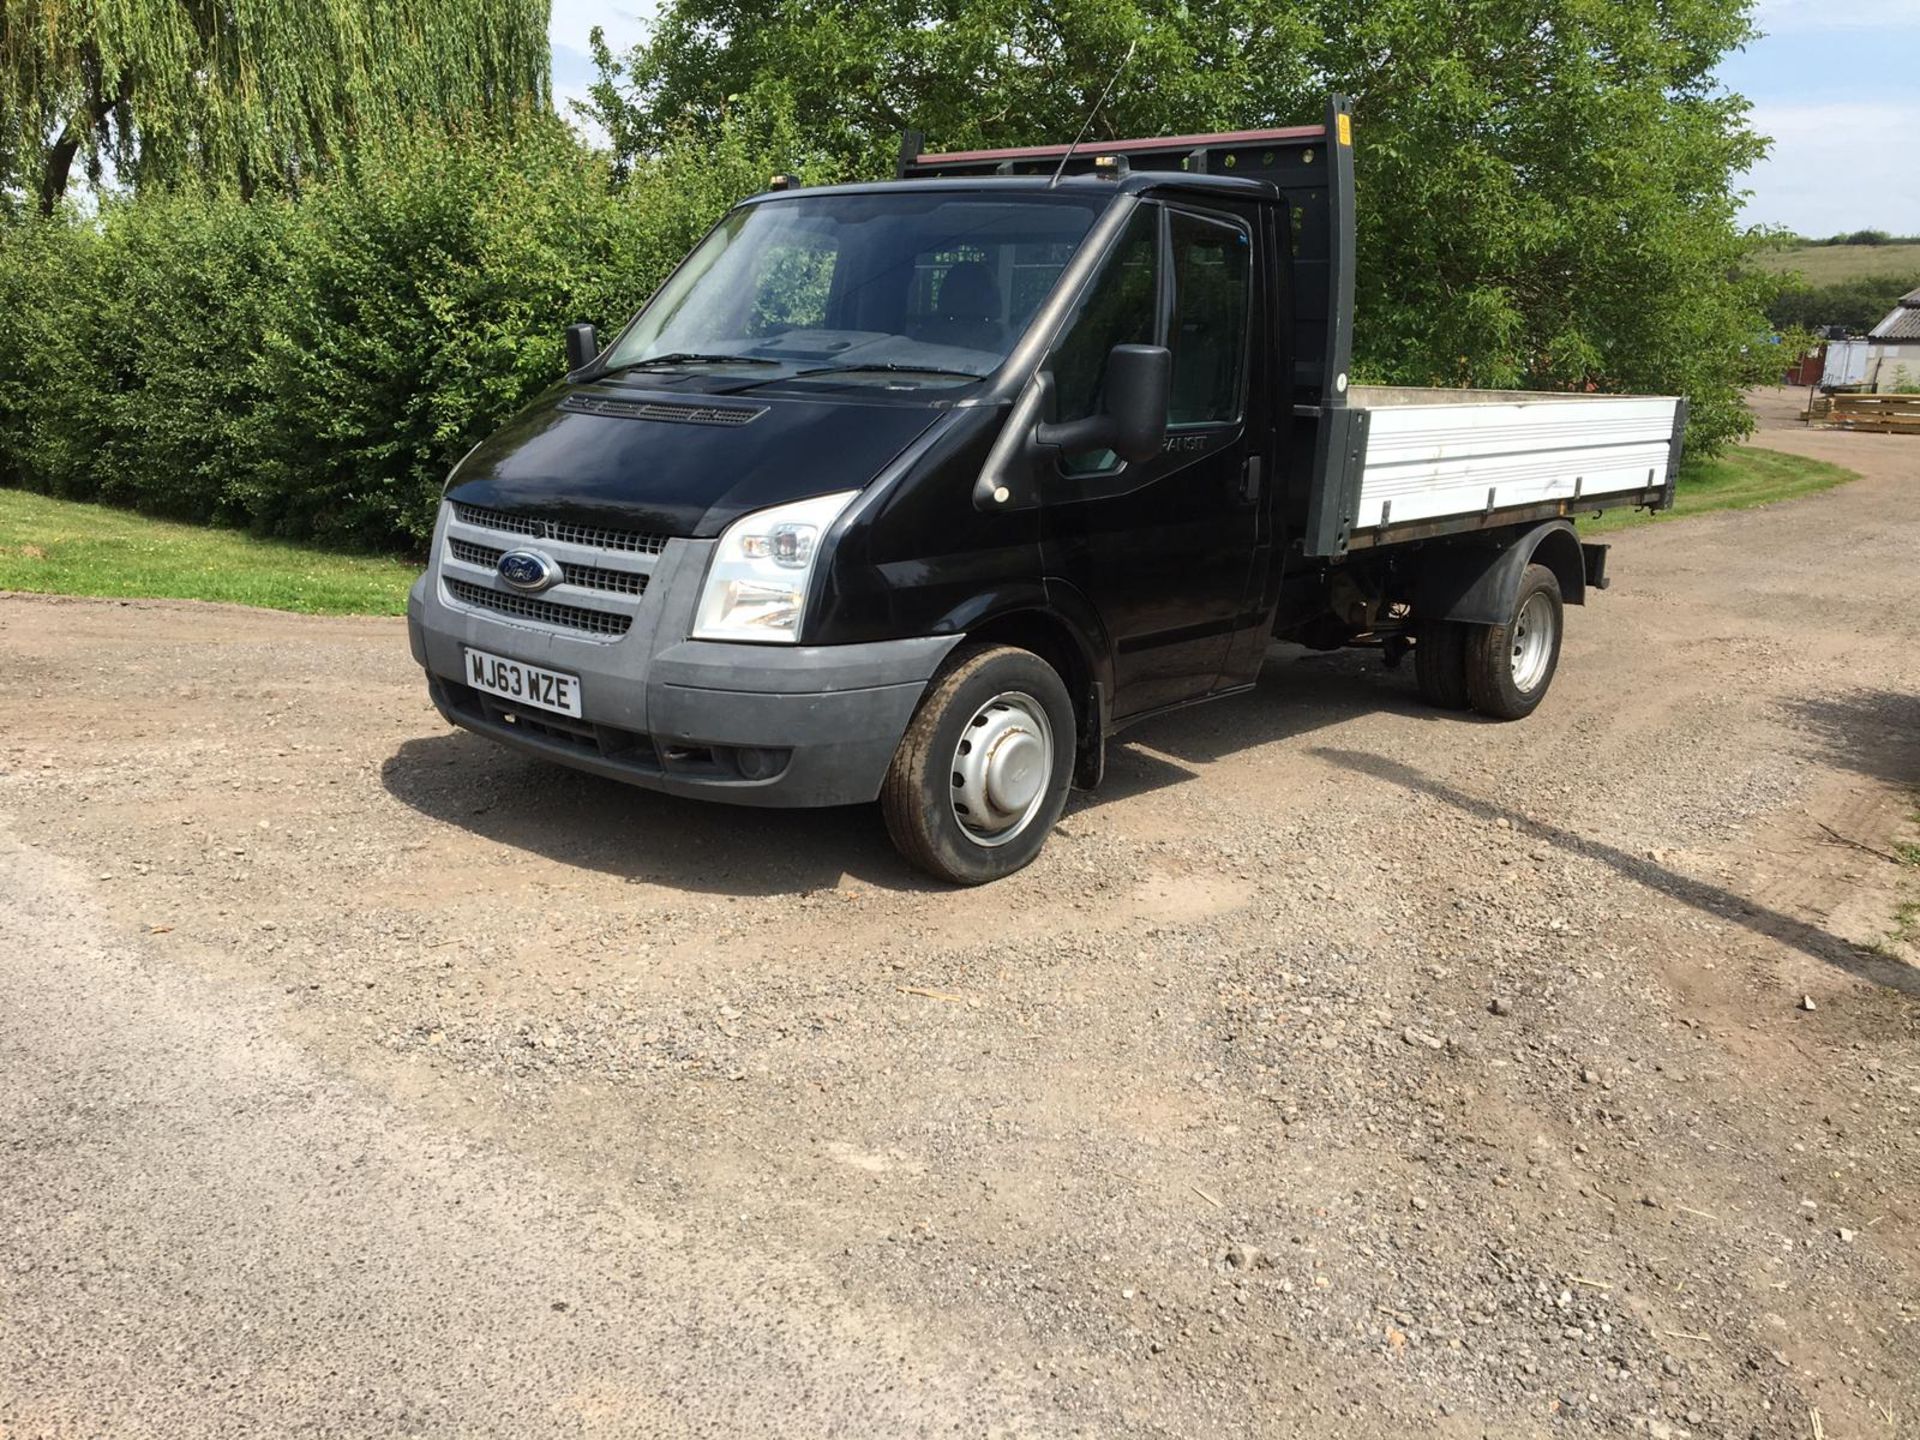 2013/63 REG FORD TRANSIT 100 T350 RWD 2.2 DIESEL DROPSIDE LORRY TIPPER, SHOWING 0 FORMER KEEPERS - Image 3 of 10